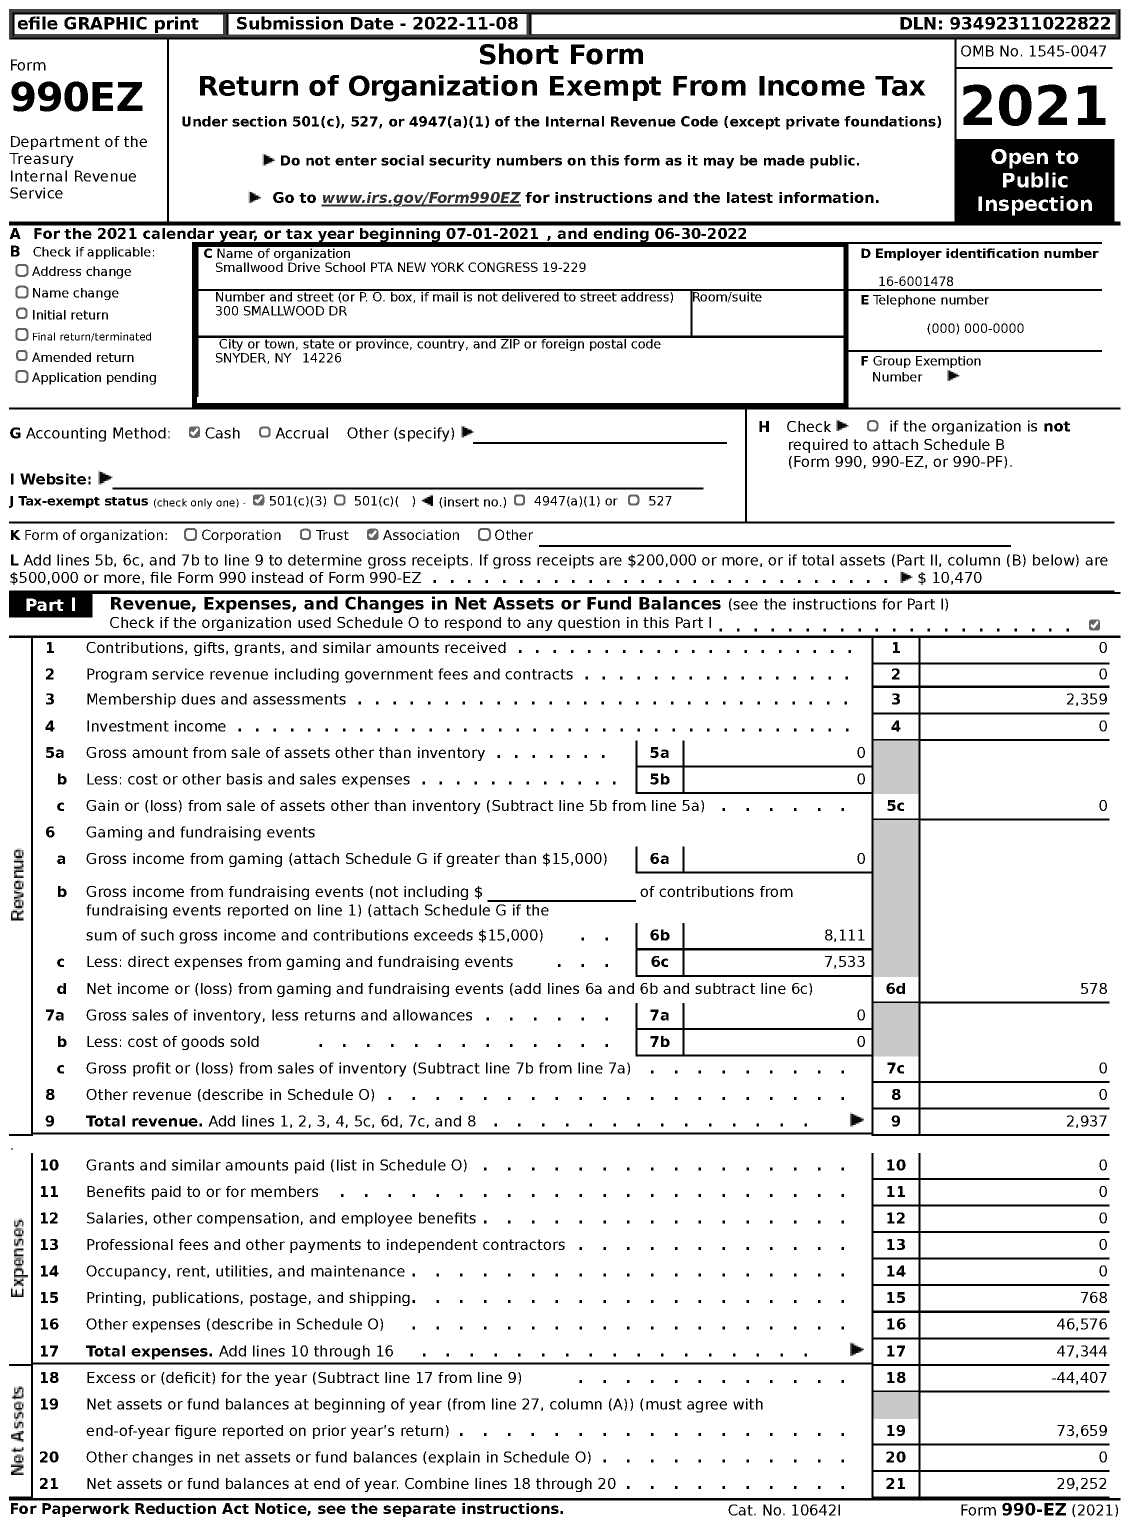 Image of first page of 2021 Form 990EZ for NEW YORK State PTA - 19-229 Smallwood Drive School PTA